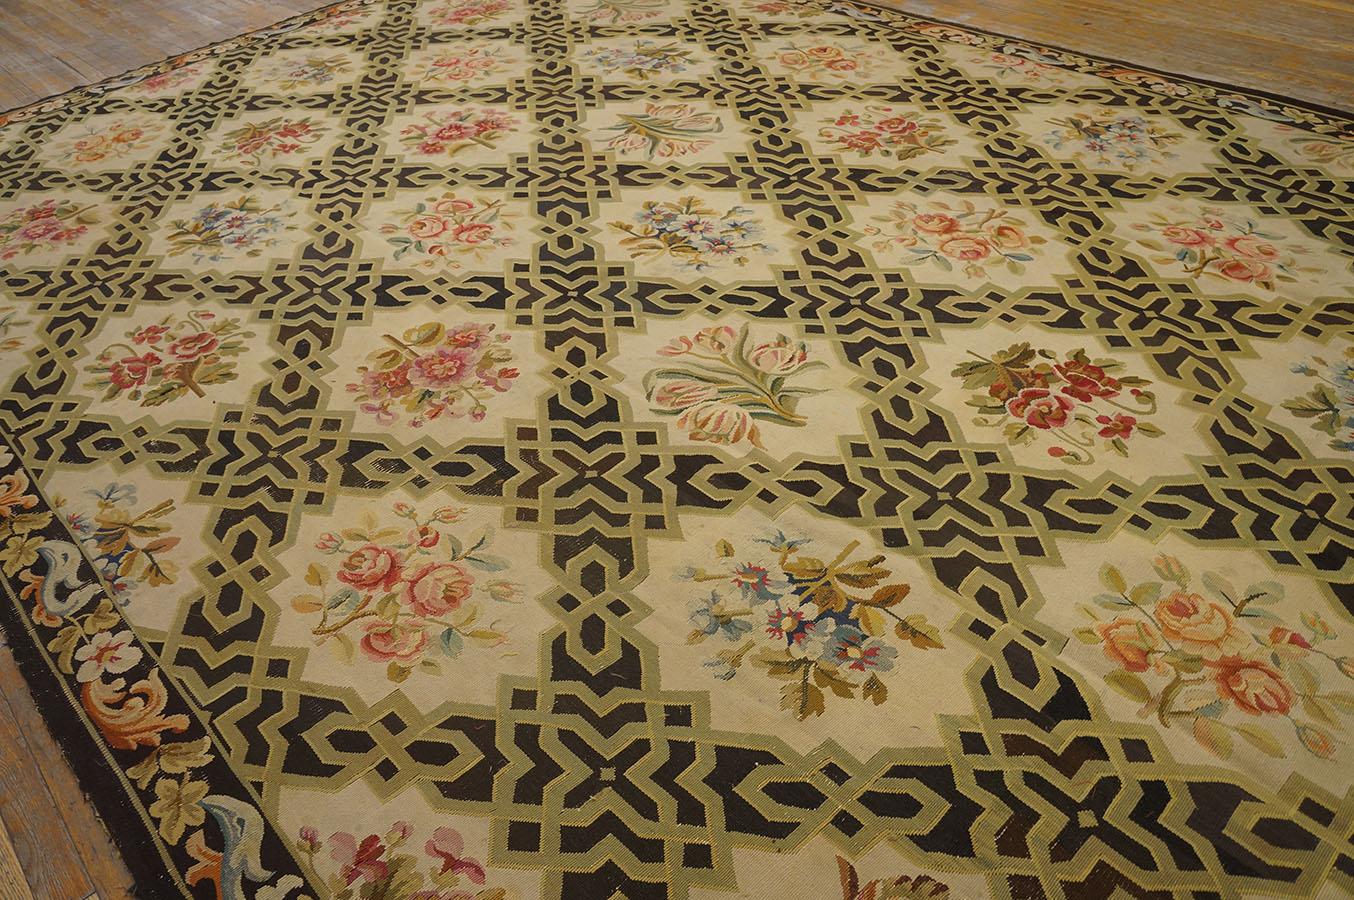 Early 20th Century French Aubusson Carpet ( 9' 8'' x 15' 3'' - 295 x 465 cm ) For Sale 10